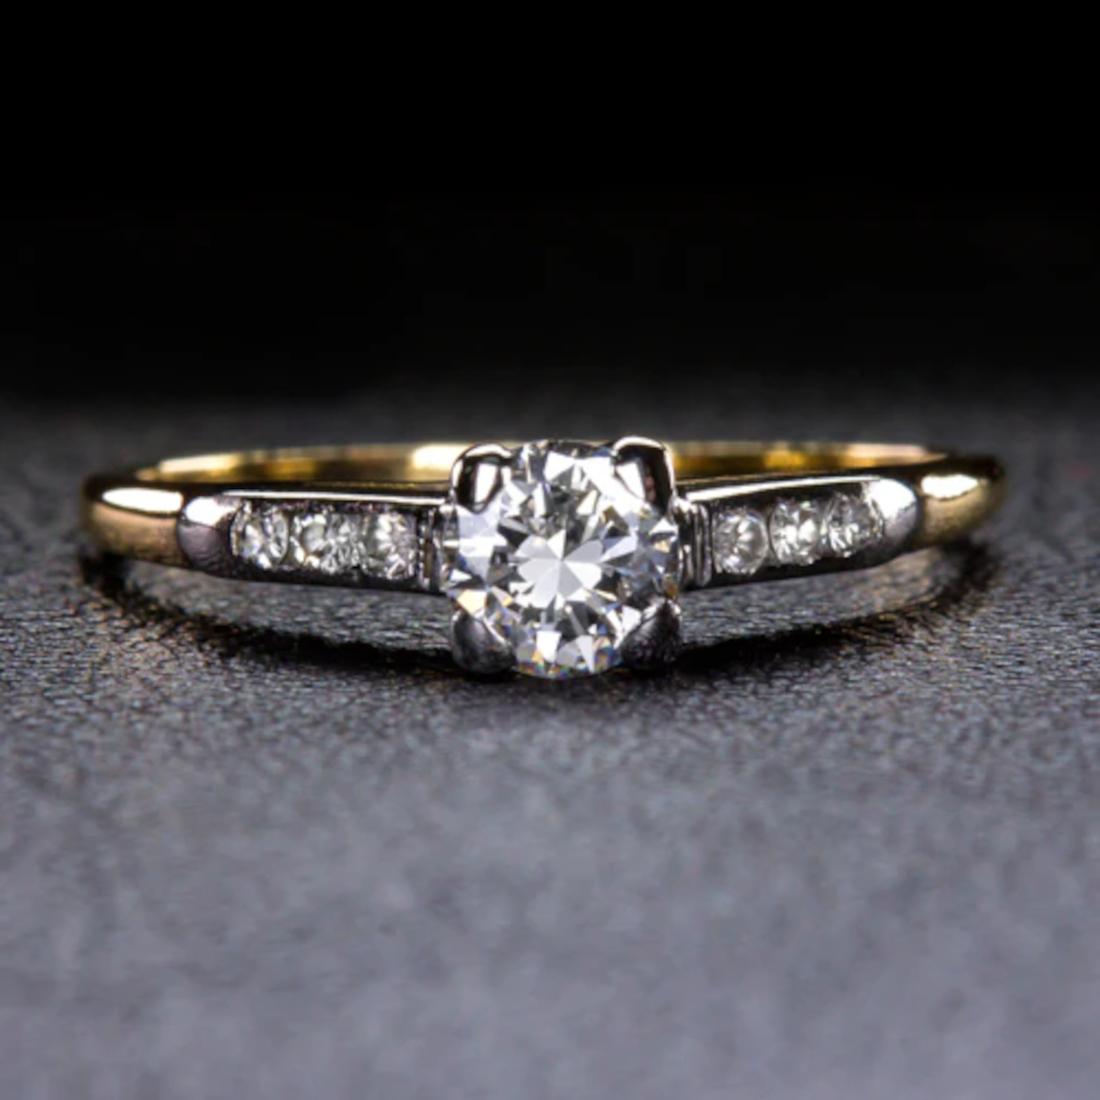 Super classic diamond engagement ring crafted in the mid century with a time tested design.
The Diamonds are bright white and completely eye clean.
The setting is in 14k two tone gold.
The central diamond weight 0.38 Ct G in Color and Si in